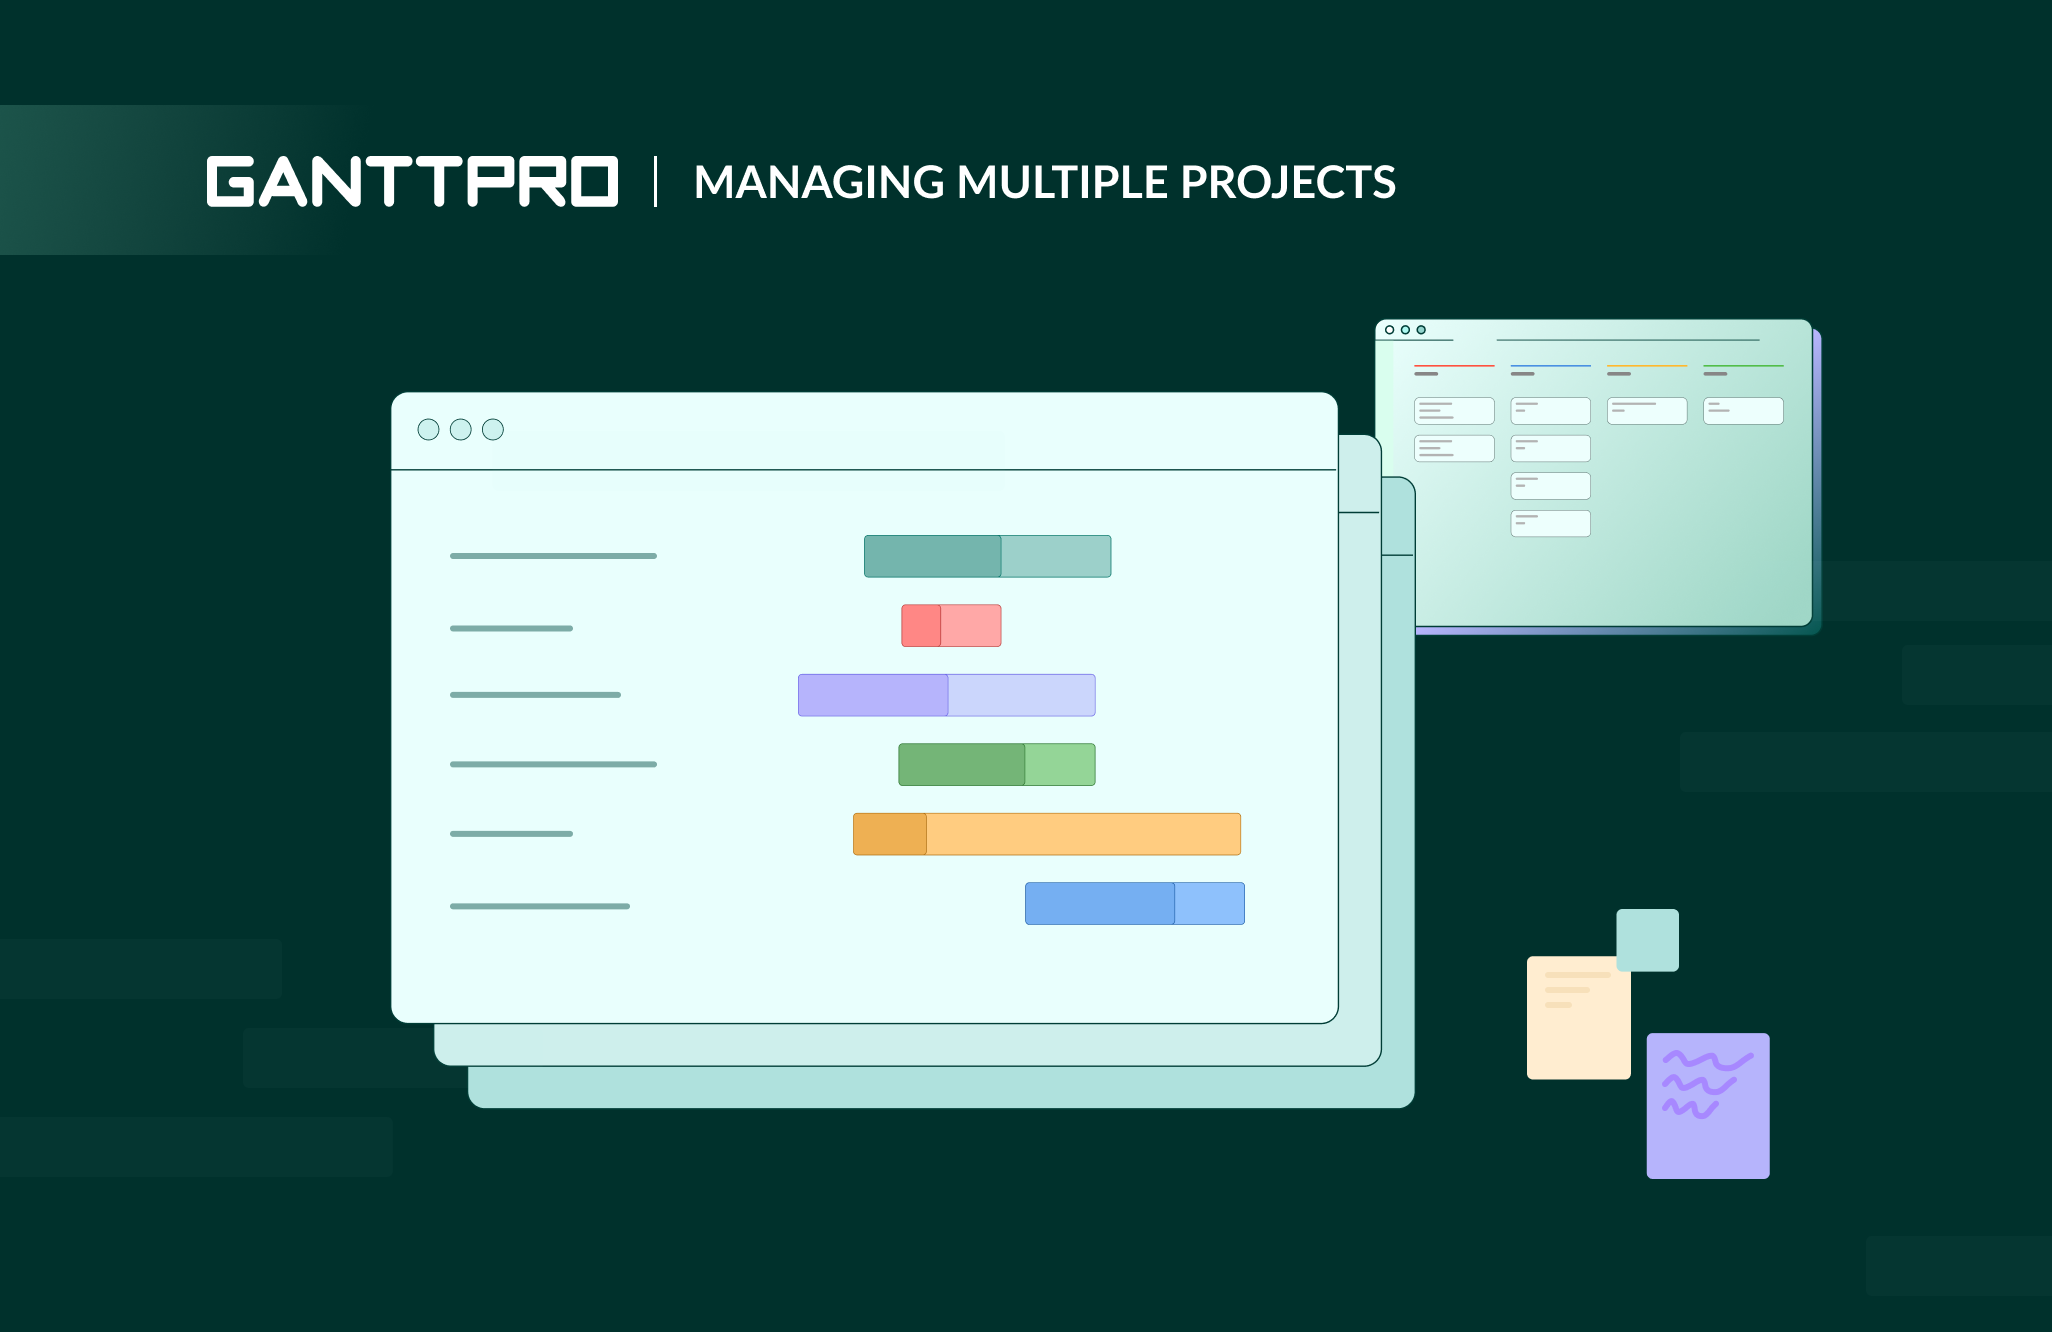 How to manage multiple projects